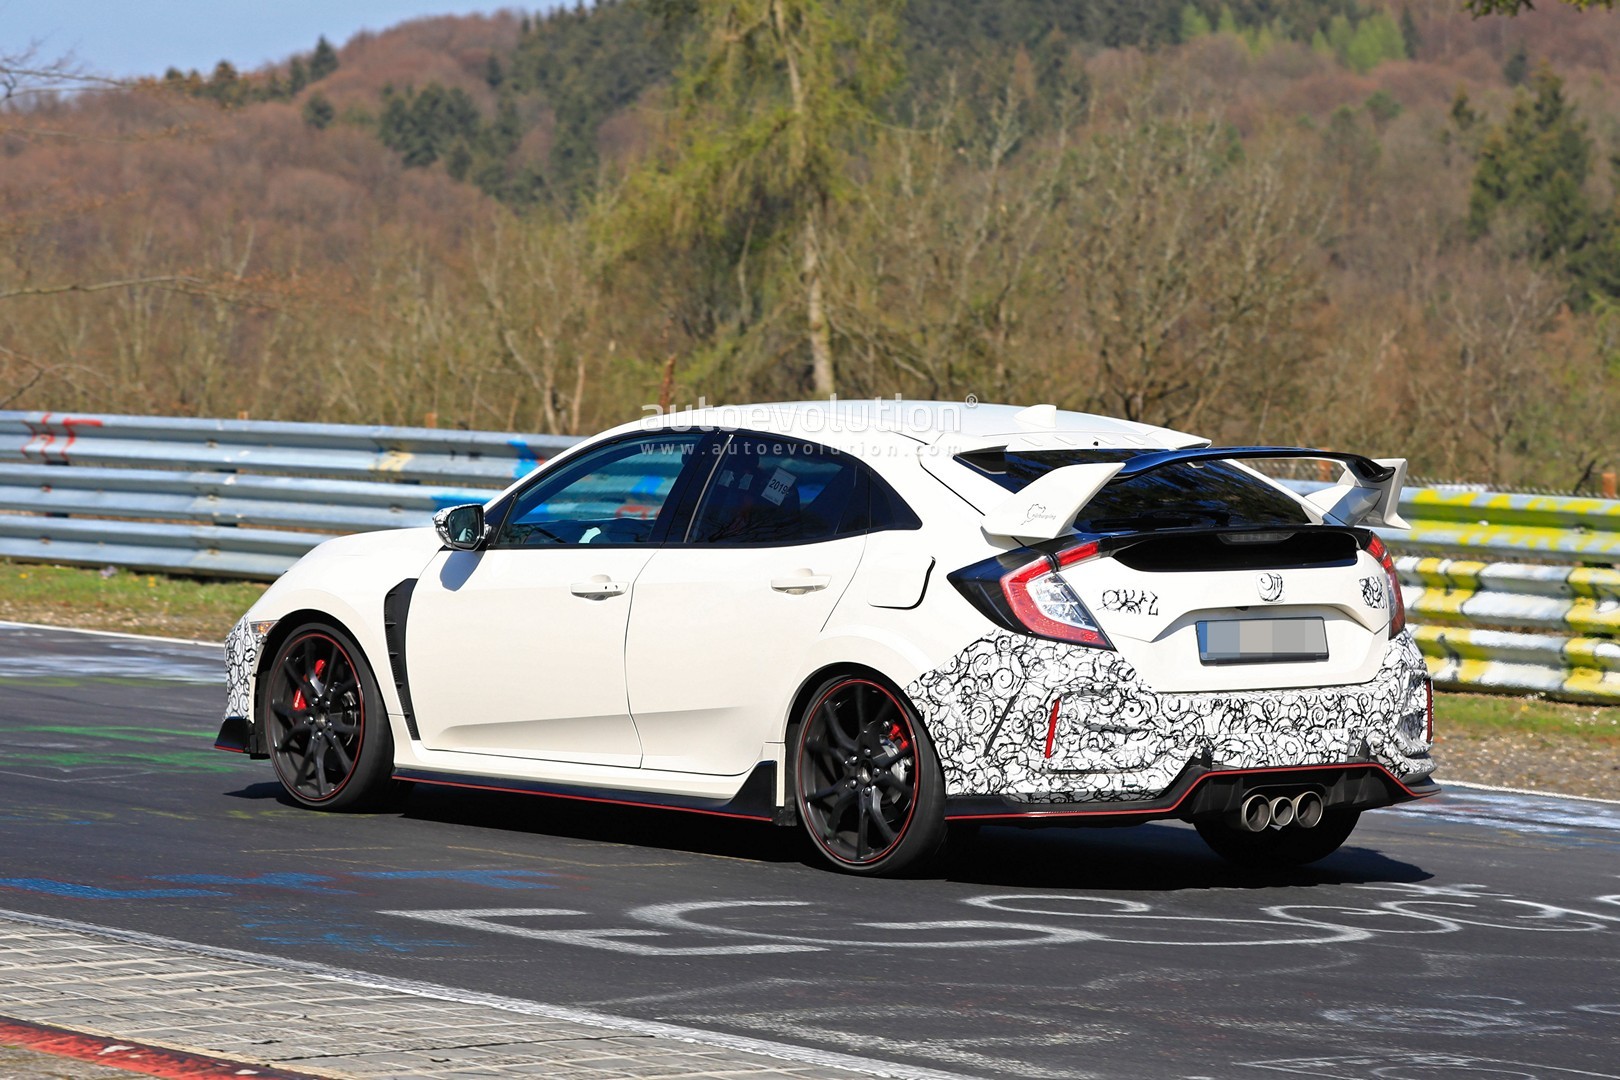 2020 Honda Civic Type R Prototypes Spied at the ...